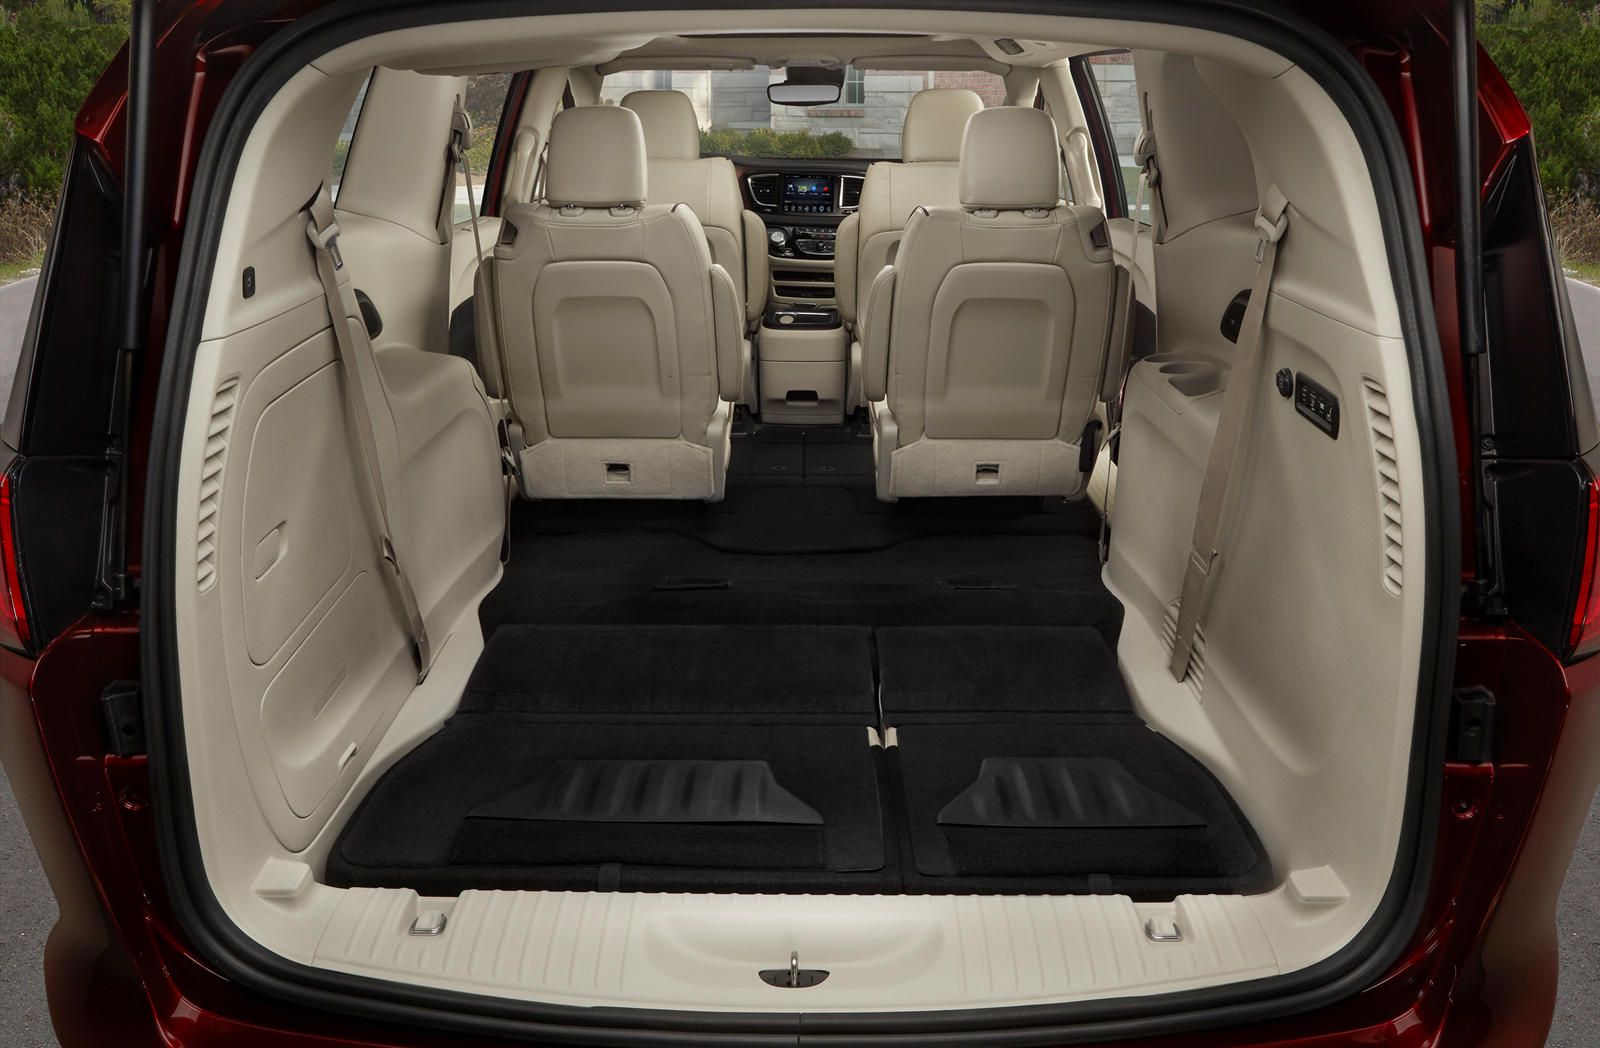 chrysler voyager seats how many